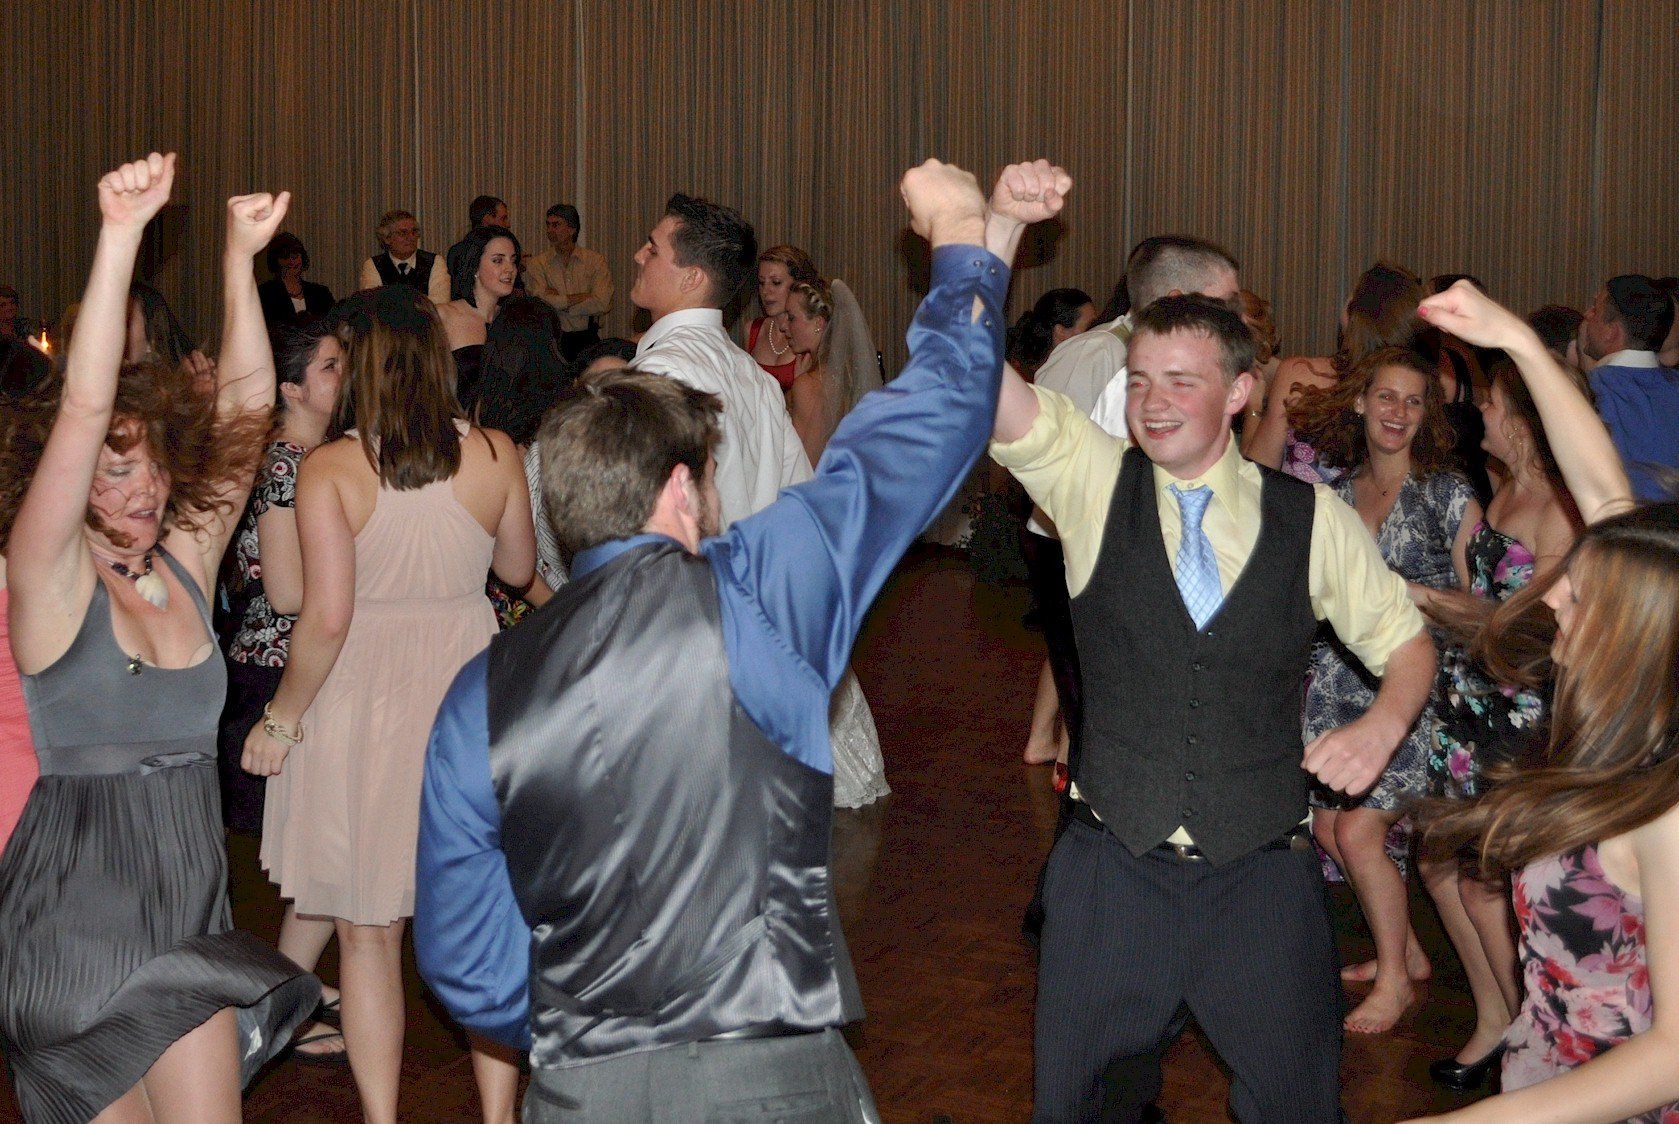 wedding guests dancing at The Double Tree Hilton, Manchester, New Hampshire